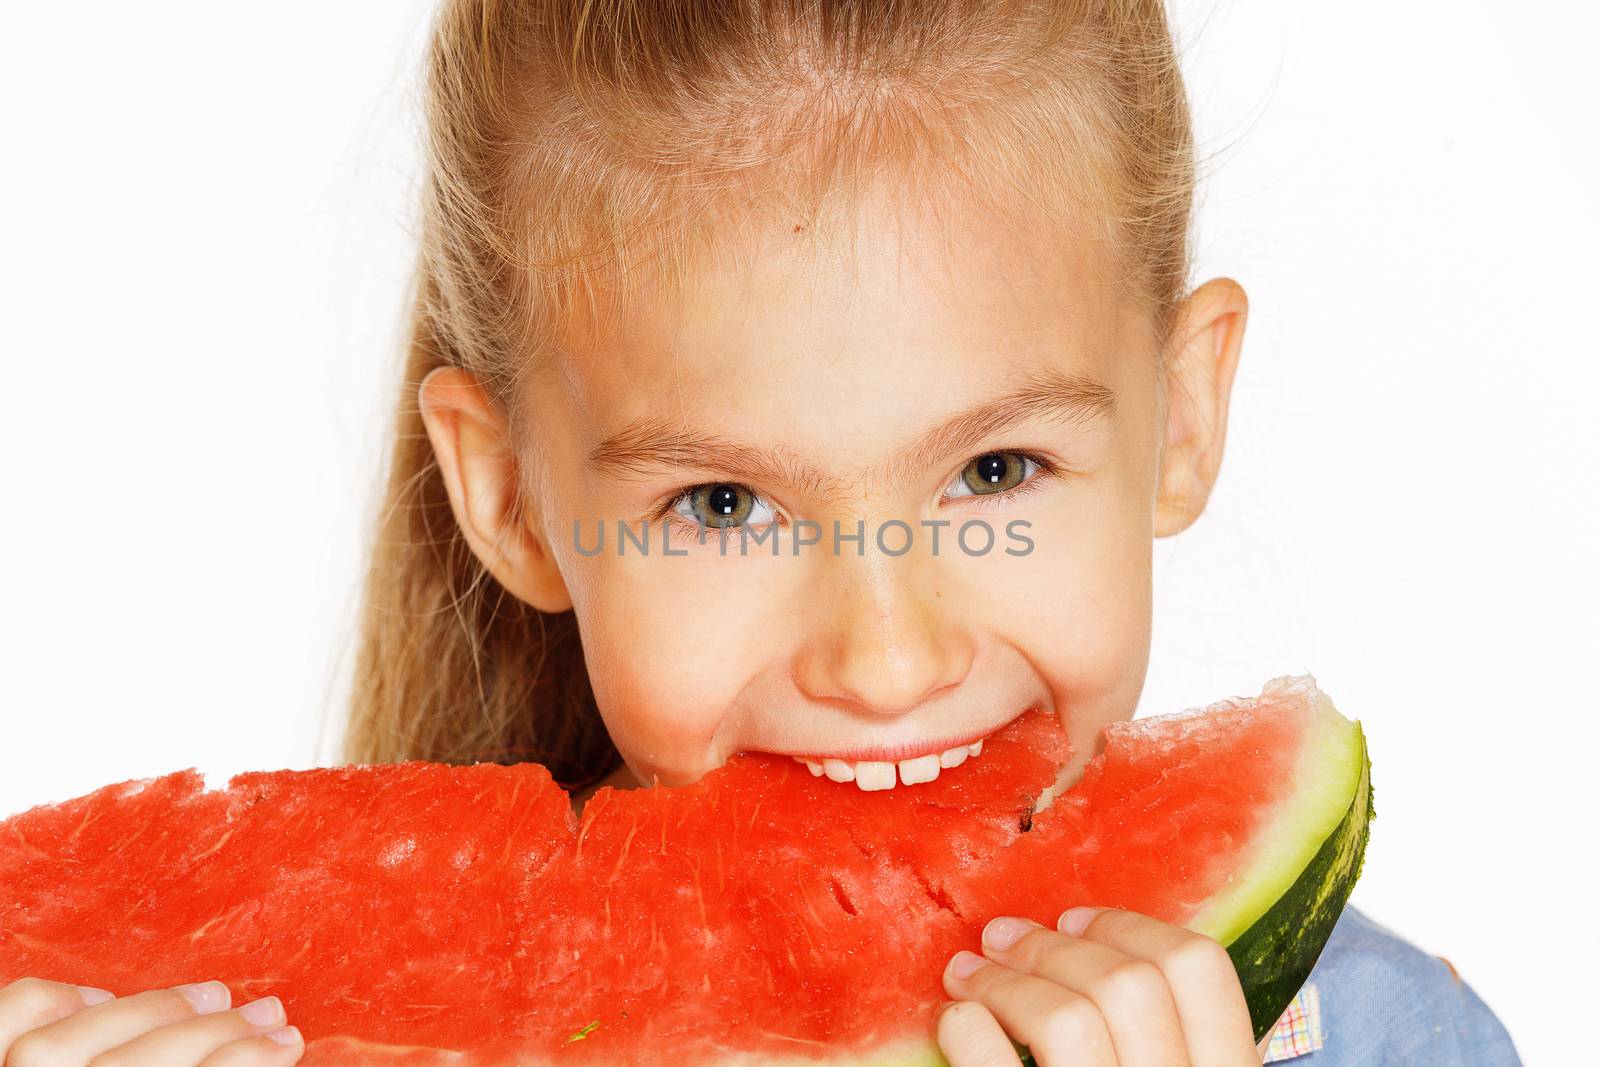 Cute girl in a blue dress eating red juicy watermelon